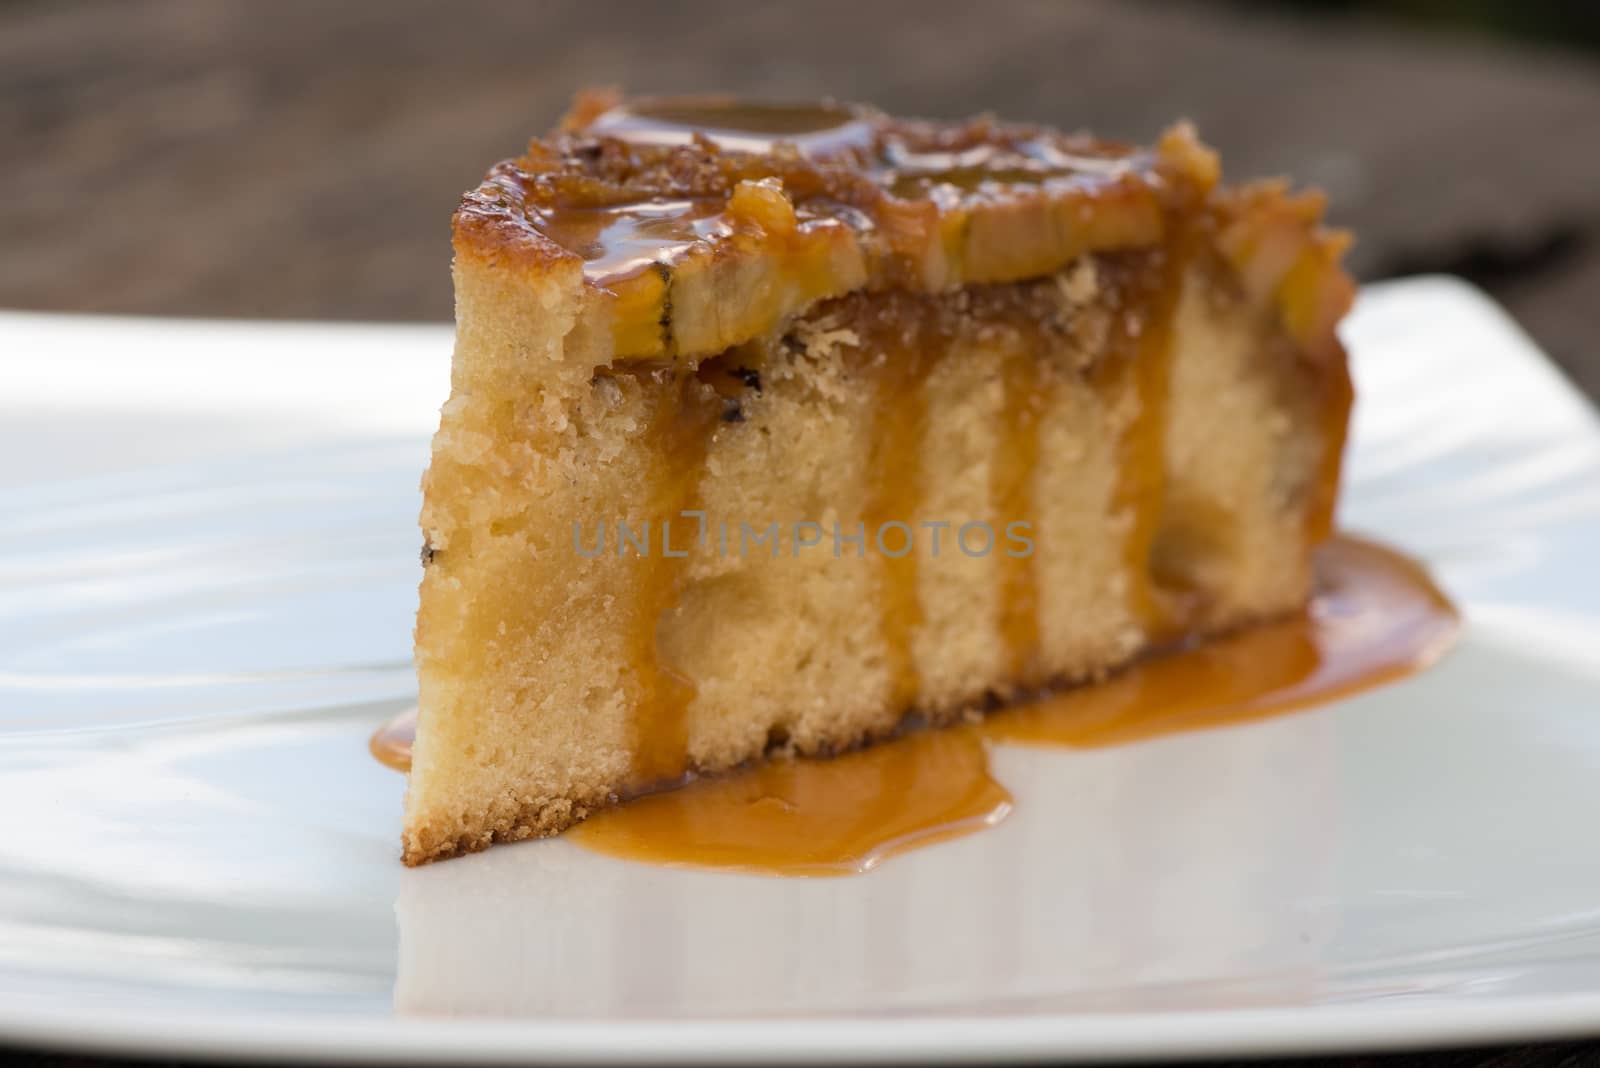 Upside down banana cake with coconut and caramel